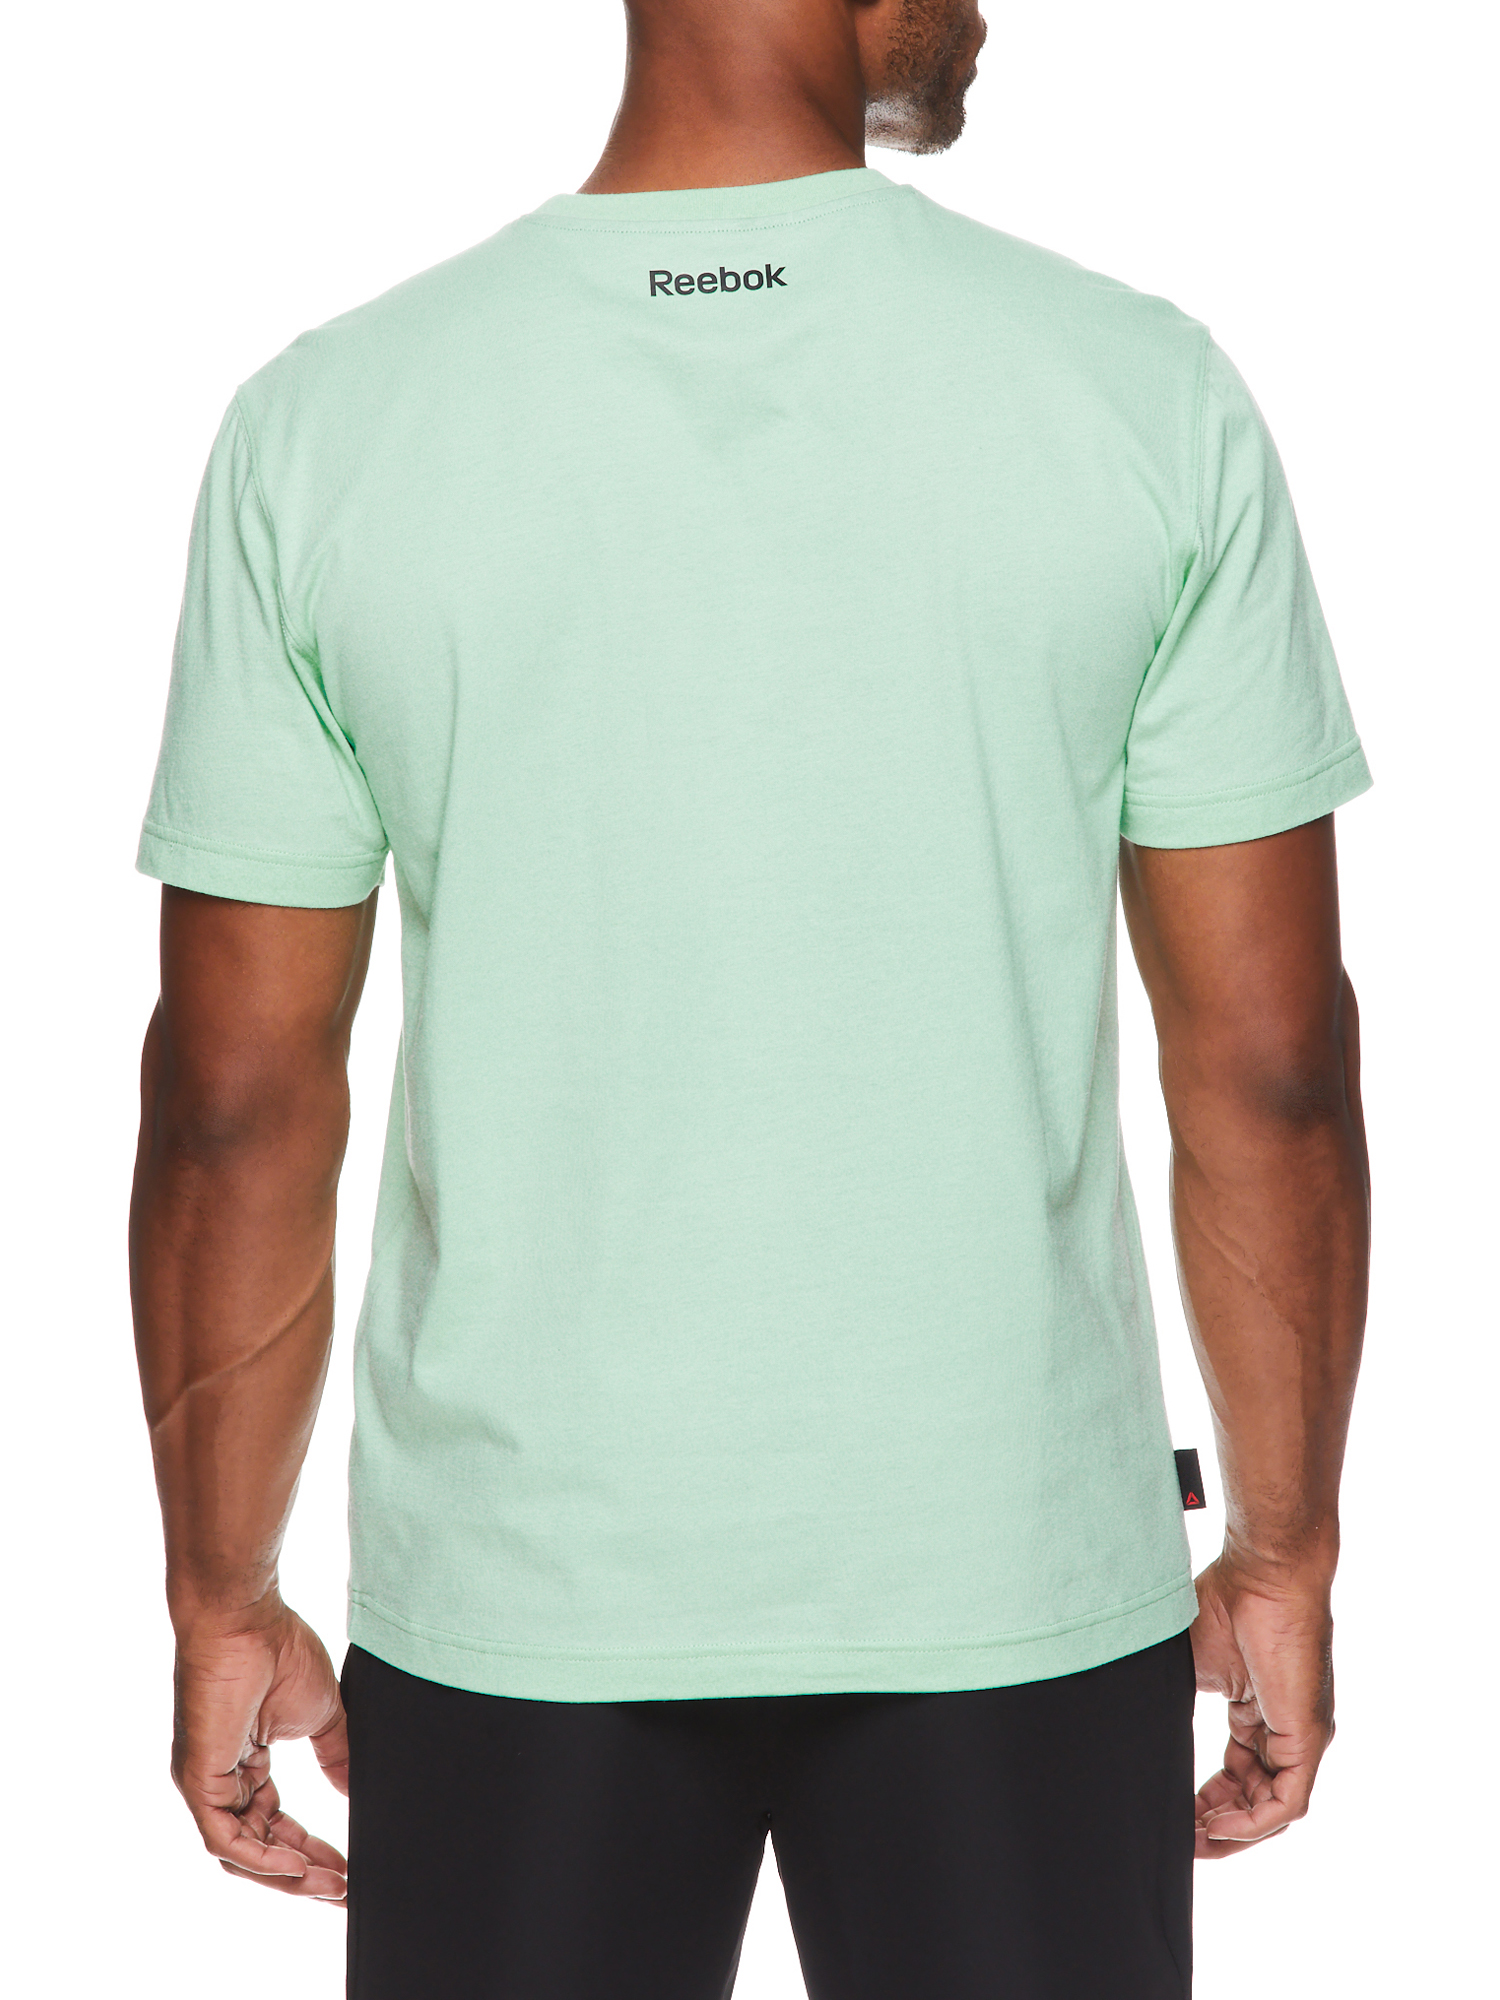 Reebok Men's and Big Men's Active Hiit Graphic Training Tee, up to Size 3XL - image 3 of 4